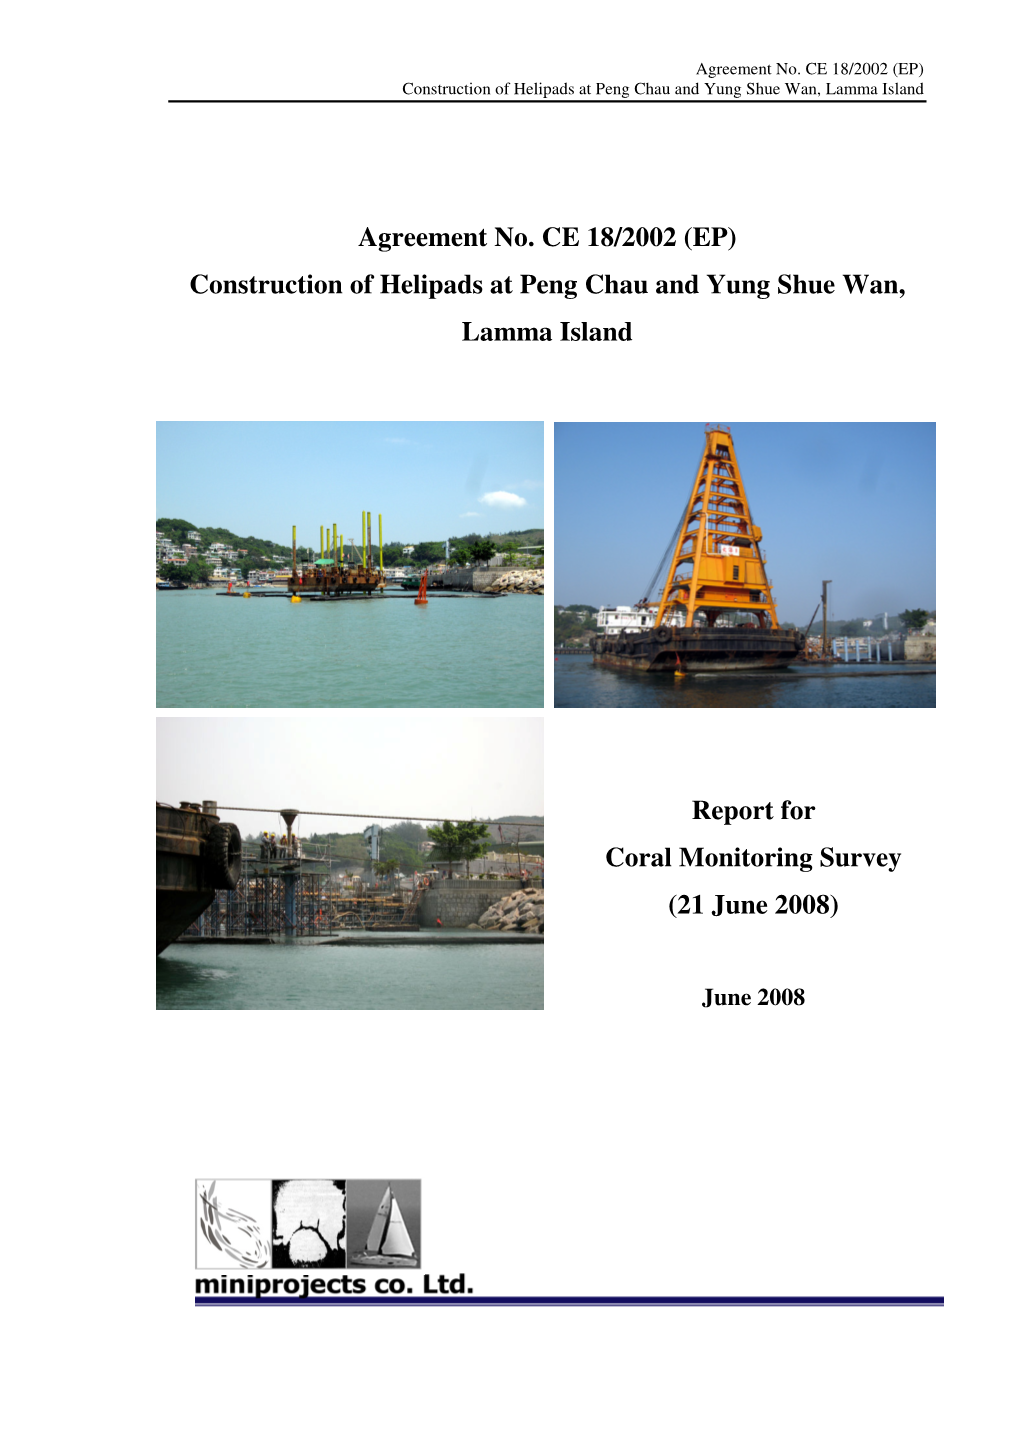 Agreement No. CE 18/2002 (EP) Construction of Helipads at Peng Chau and Yung Shue Wan, Lamma Island Report for Coral Monitoring